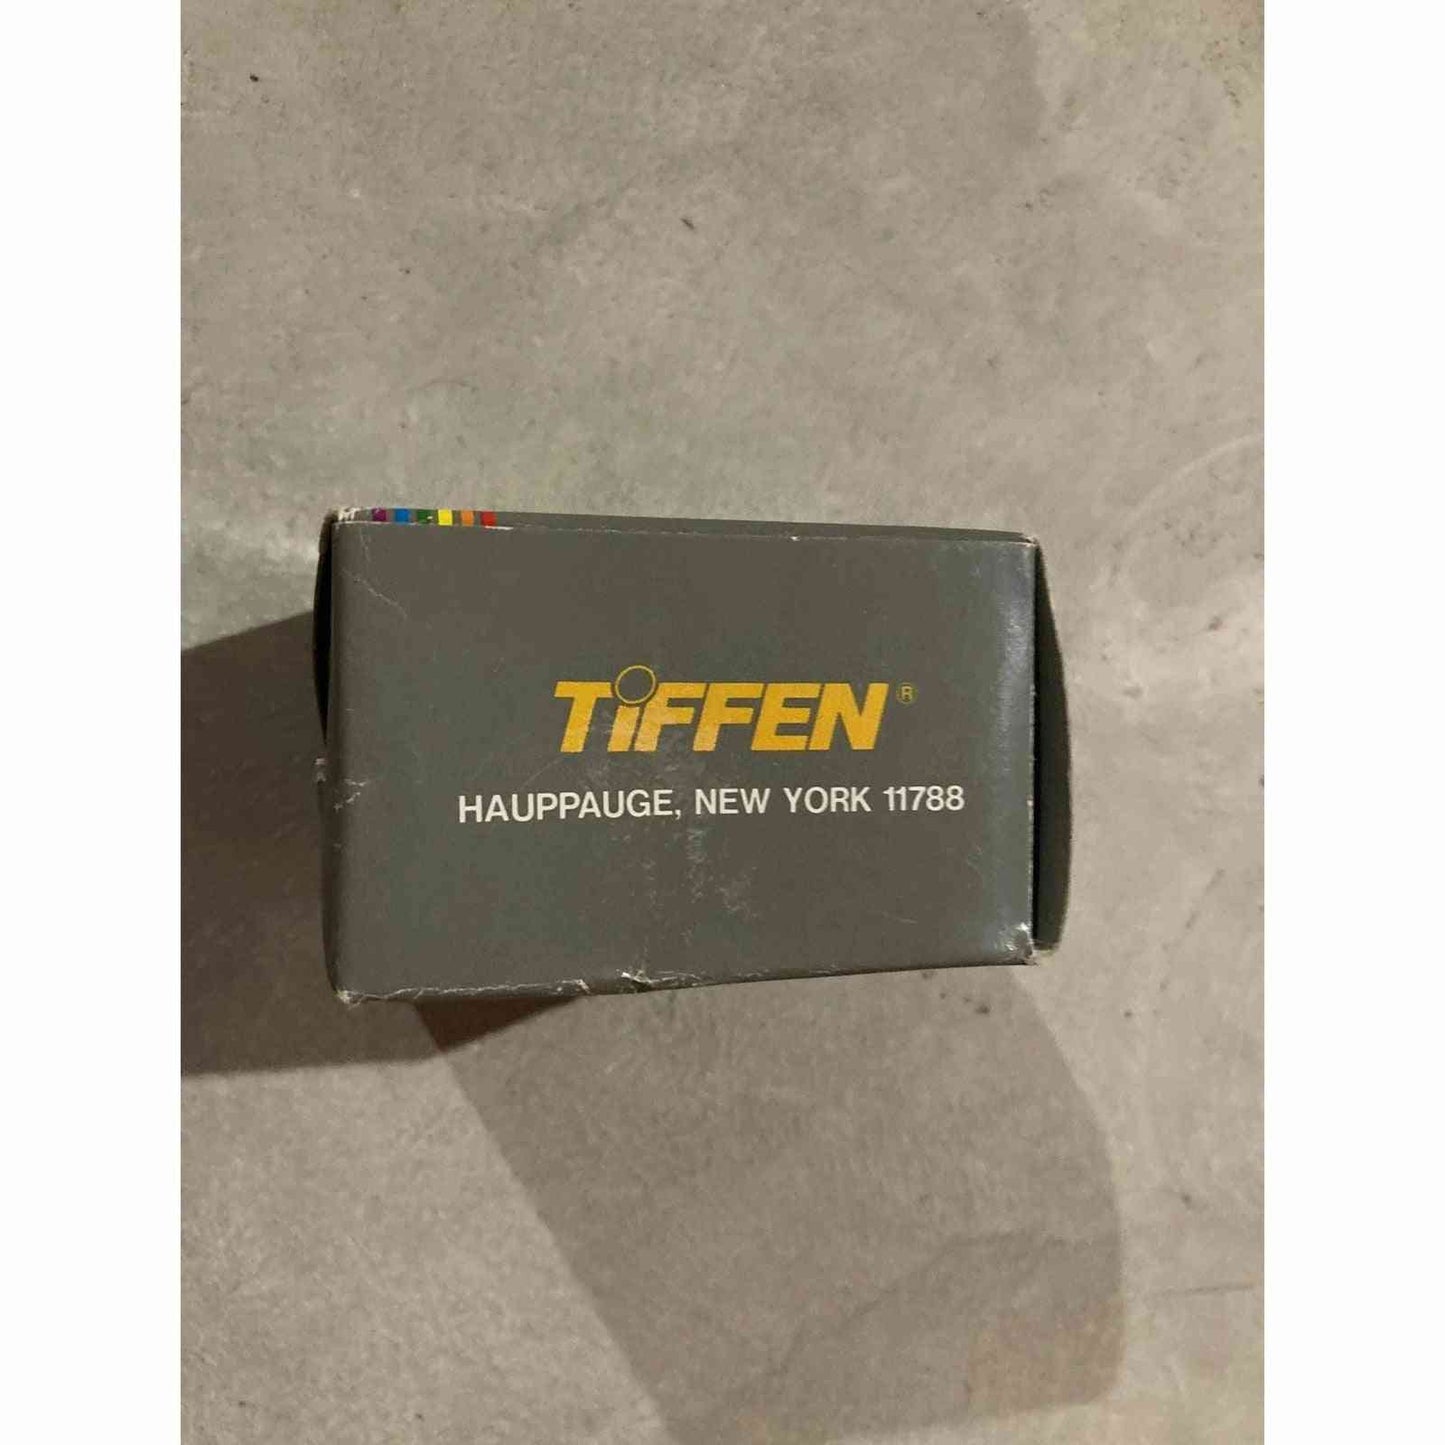 New Tiffen 37mm Close-up Lens 3-Set Diopters BooksCardsNBikes